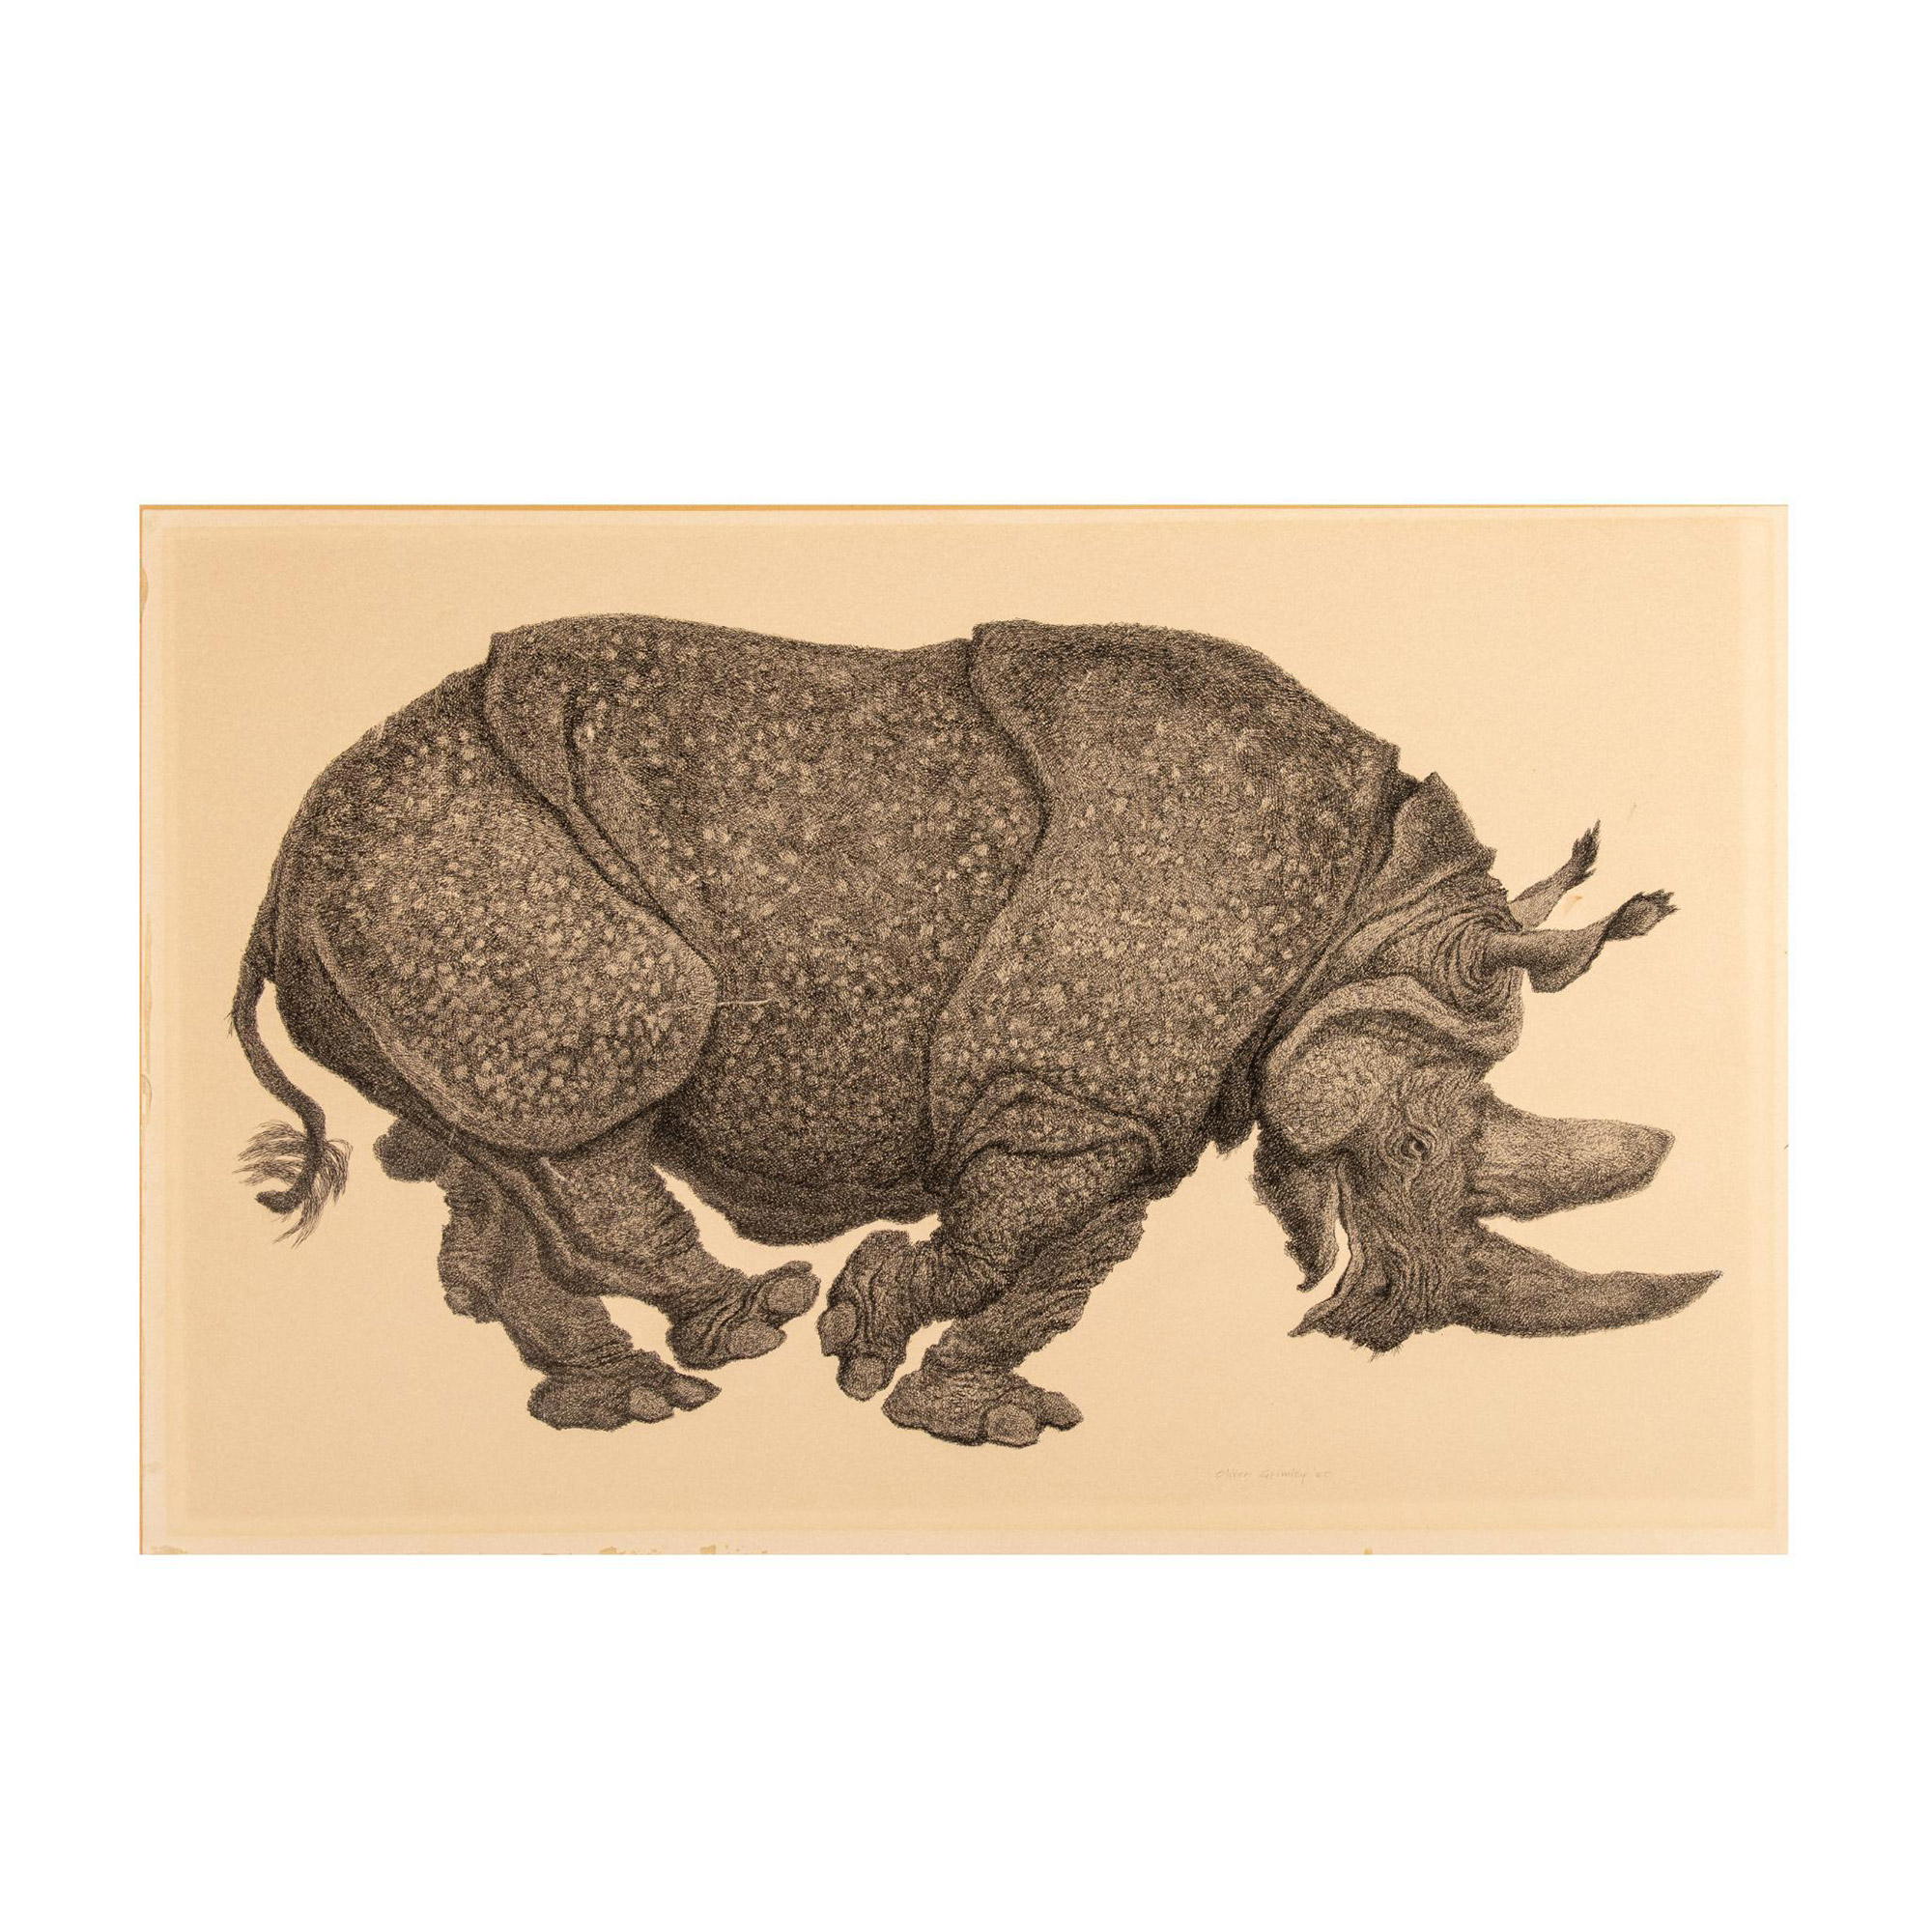 Oliver Grimley, Original Pen & Ink Drawing on Paper, Rhino - Image 2 of 5